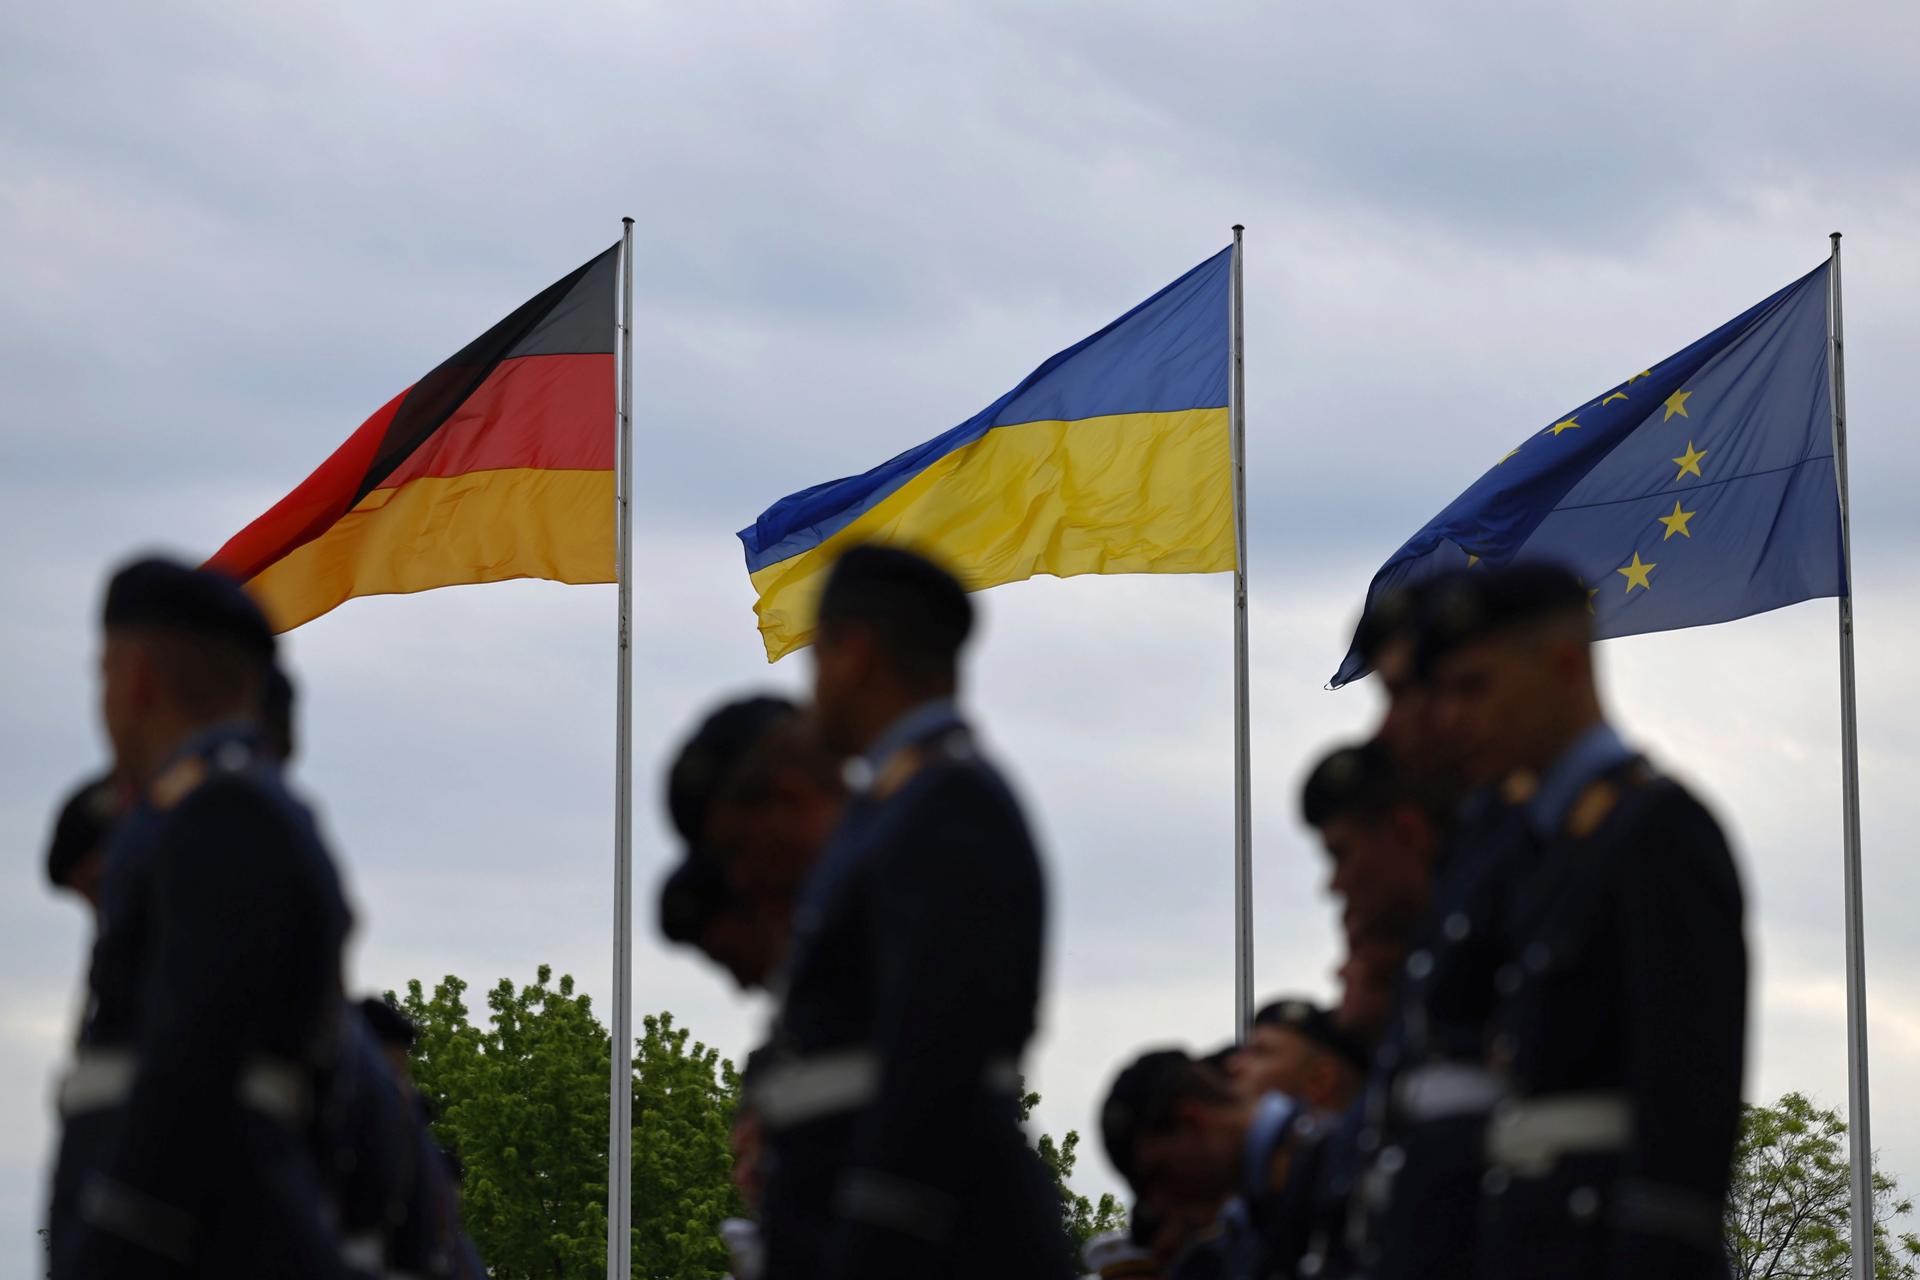 Soldiers of a German Armed Forces honor guard march up in front of flags hoisted prior to the arrival of the Ukrainian President Volodymyr Zelensky at the Chancellery in Berlin, Germany, on 14 May 2023. EFE-EPA/HANNIBAL HANSCHKE
